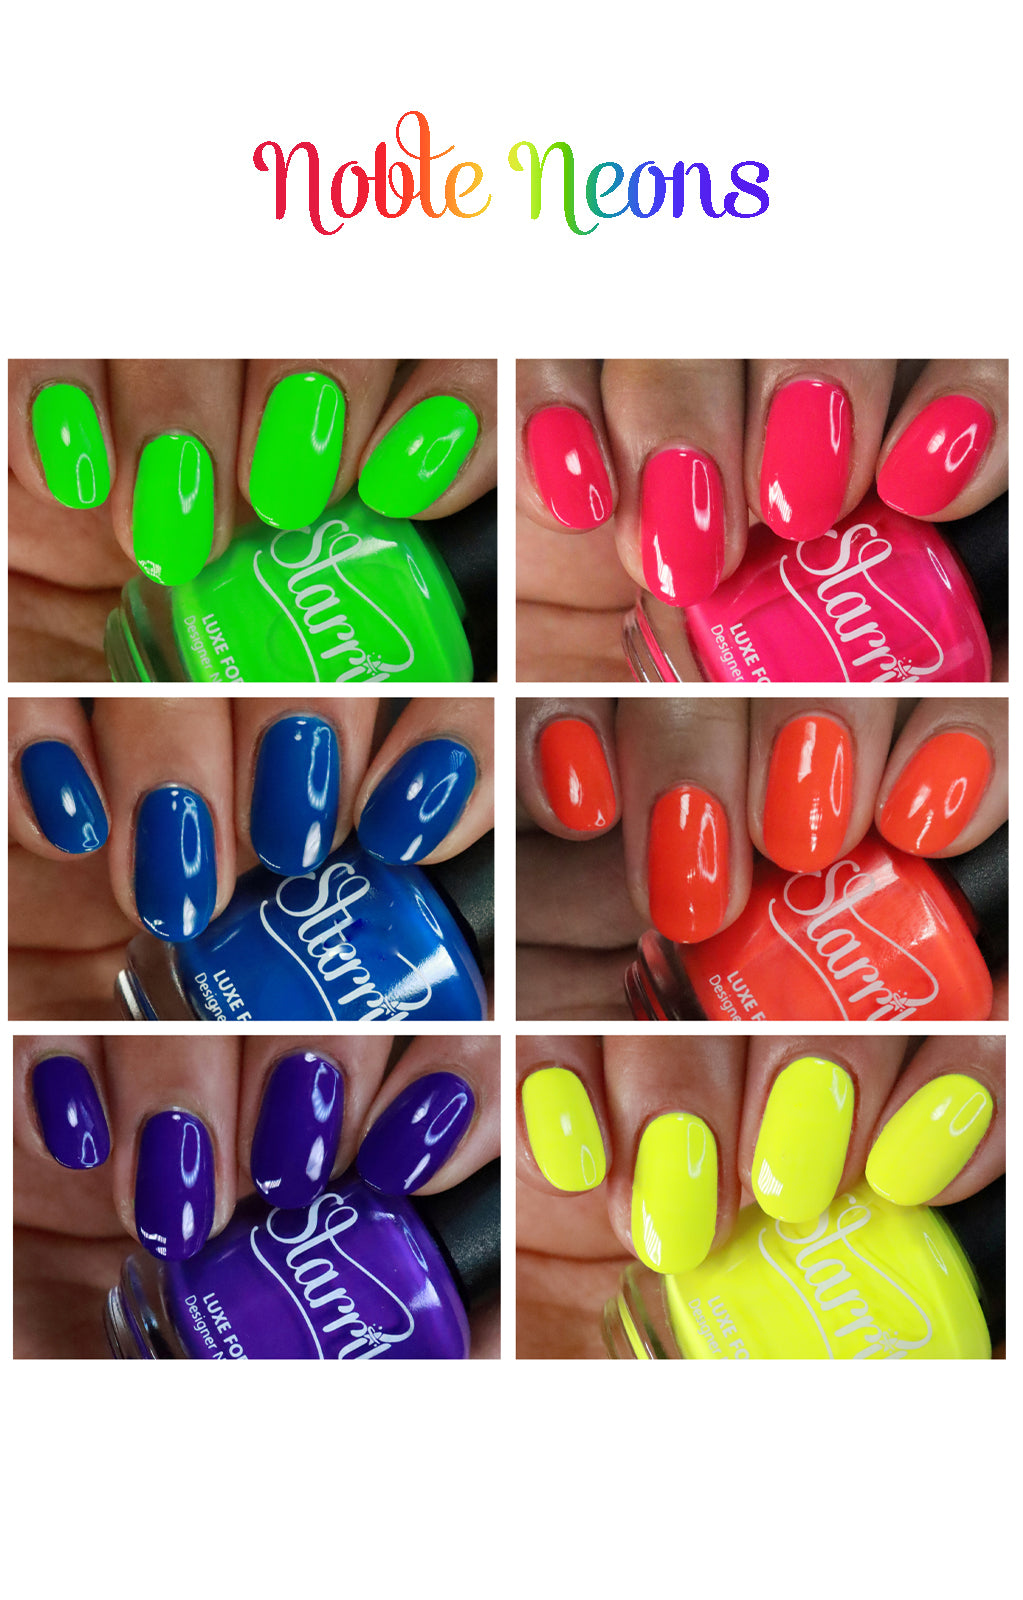 Noble Neons Collection